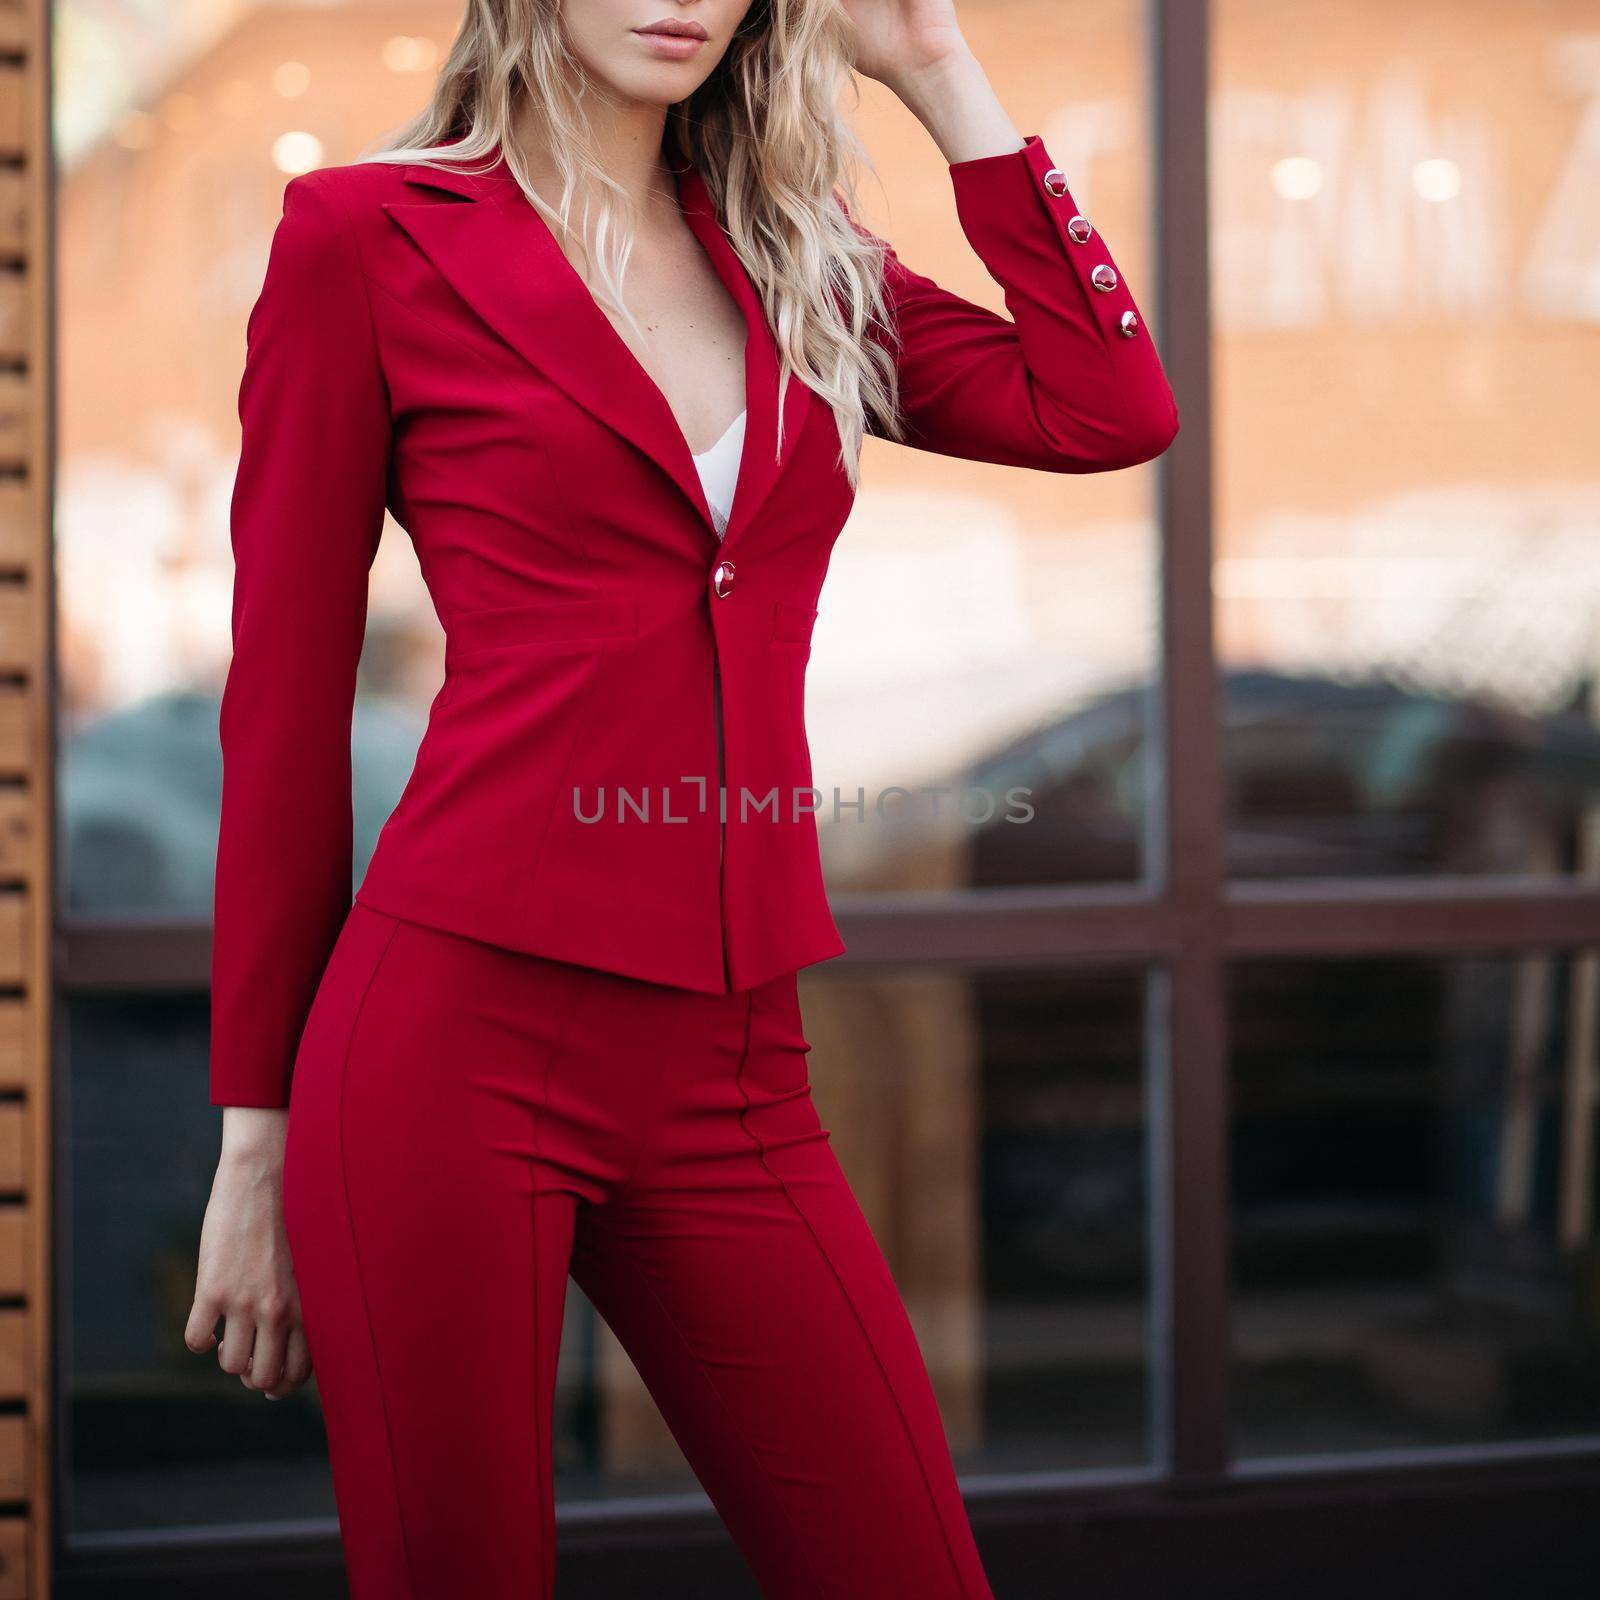 elegant gorgeous blonde businesswoman in expensive dark red jacket and trousers with golden buttons on sleeves. She is standing with arms crossed.